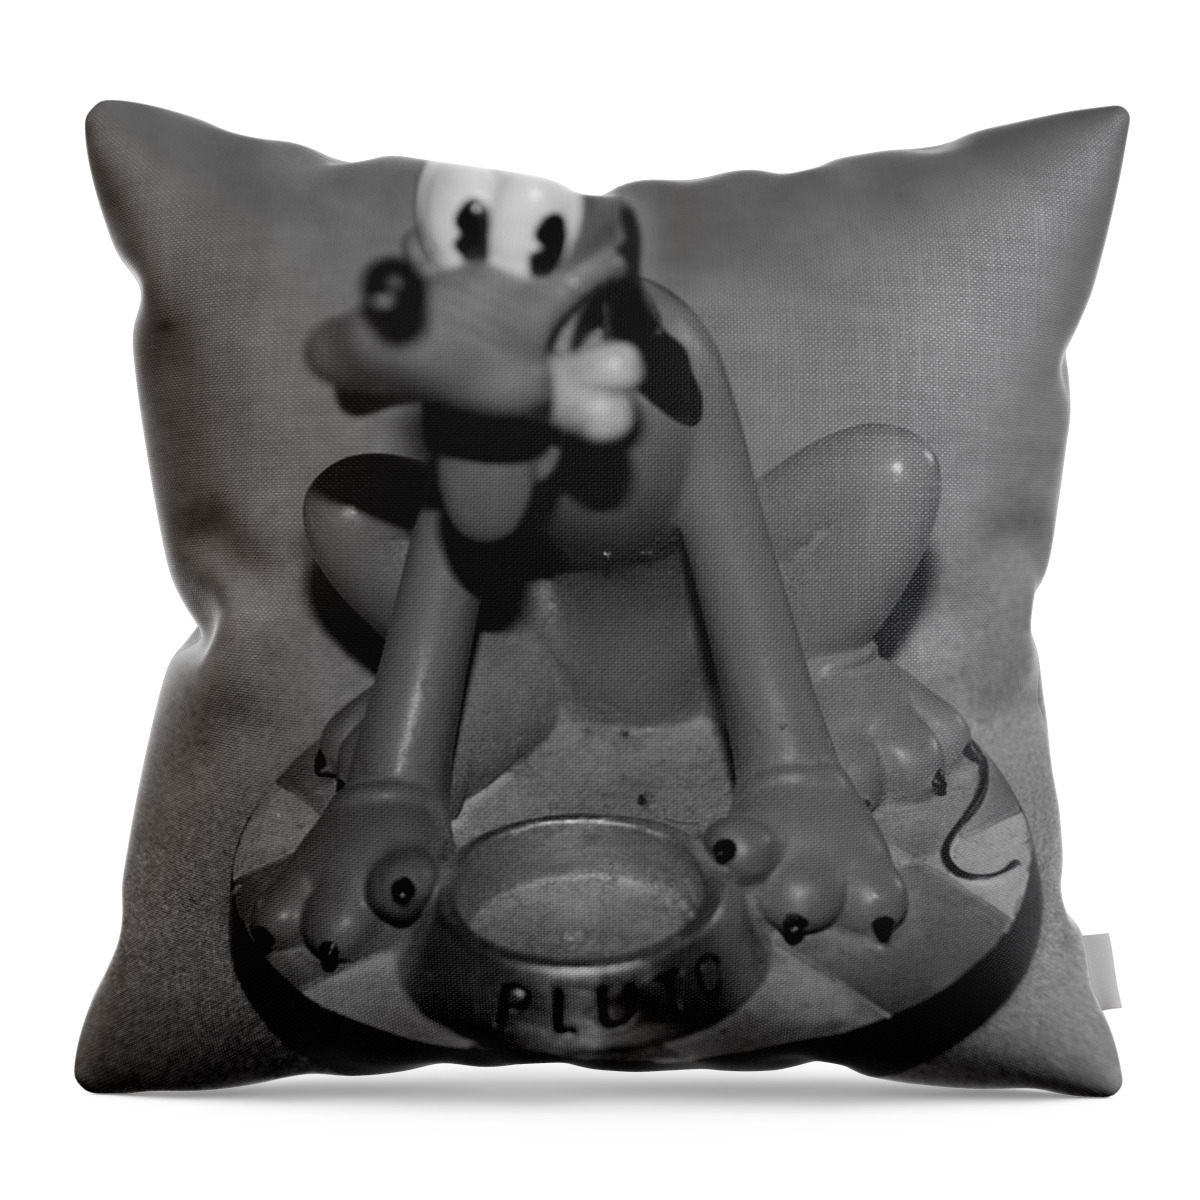 Black And White Throw Pillow featuring the photograph Pluto by Rob Hans